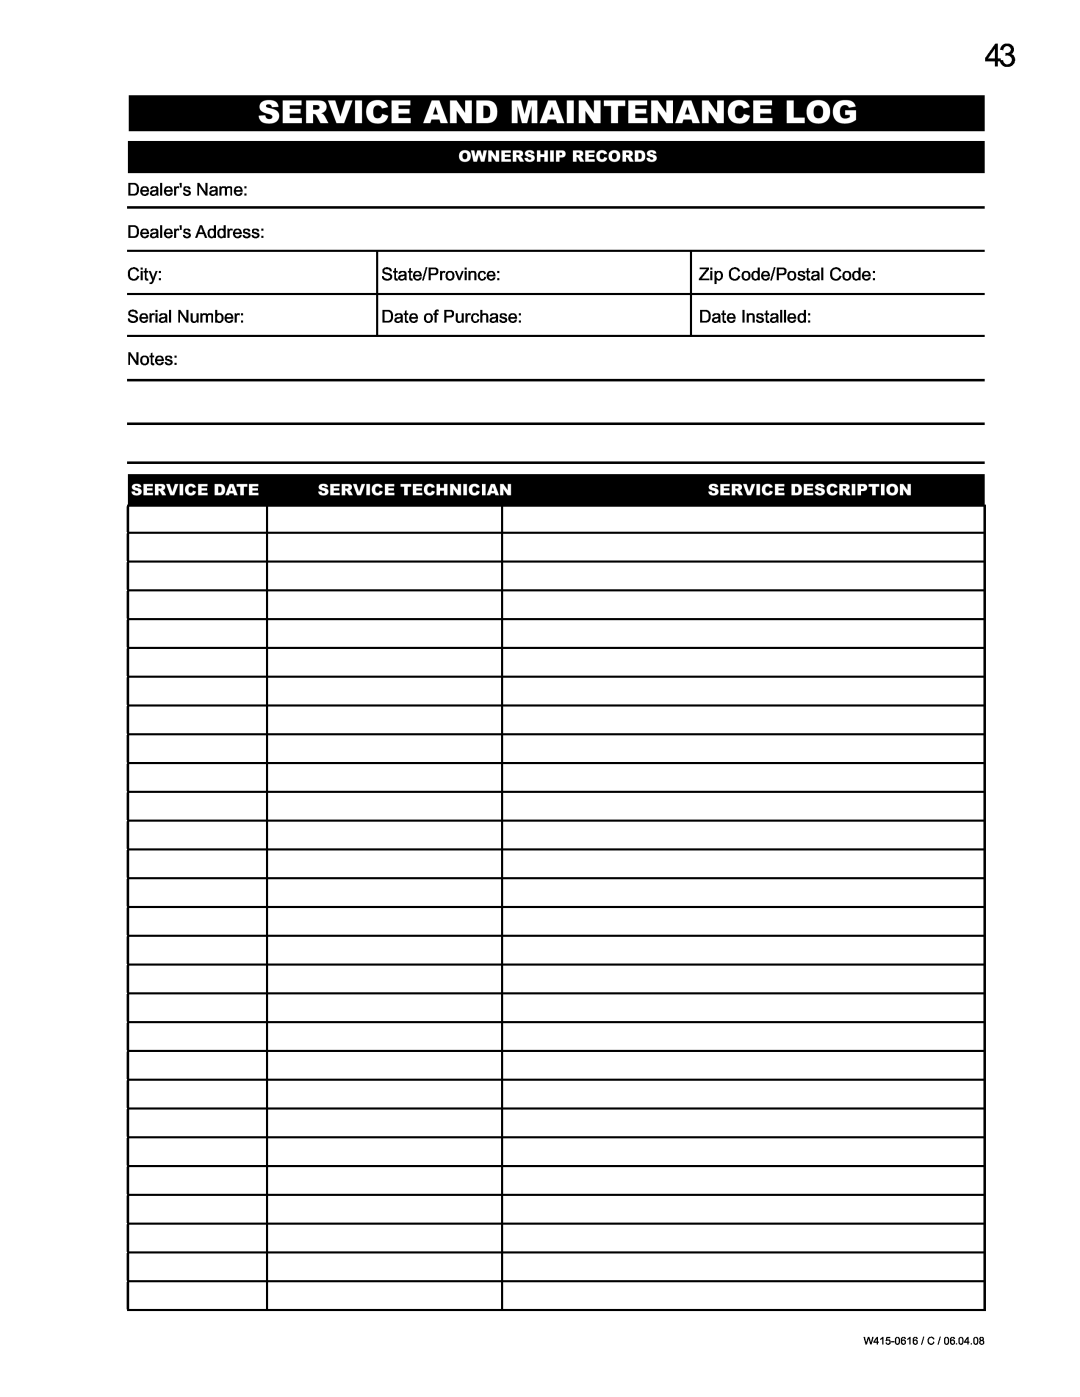 Napoleon Fireplaces NPS40, NPI40 manual Service And Maintenance Log, Ownership Records, Service Date, Service Technician 